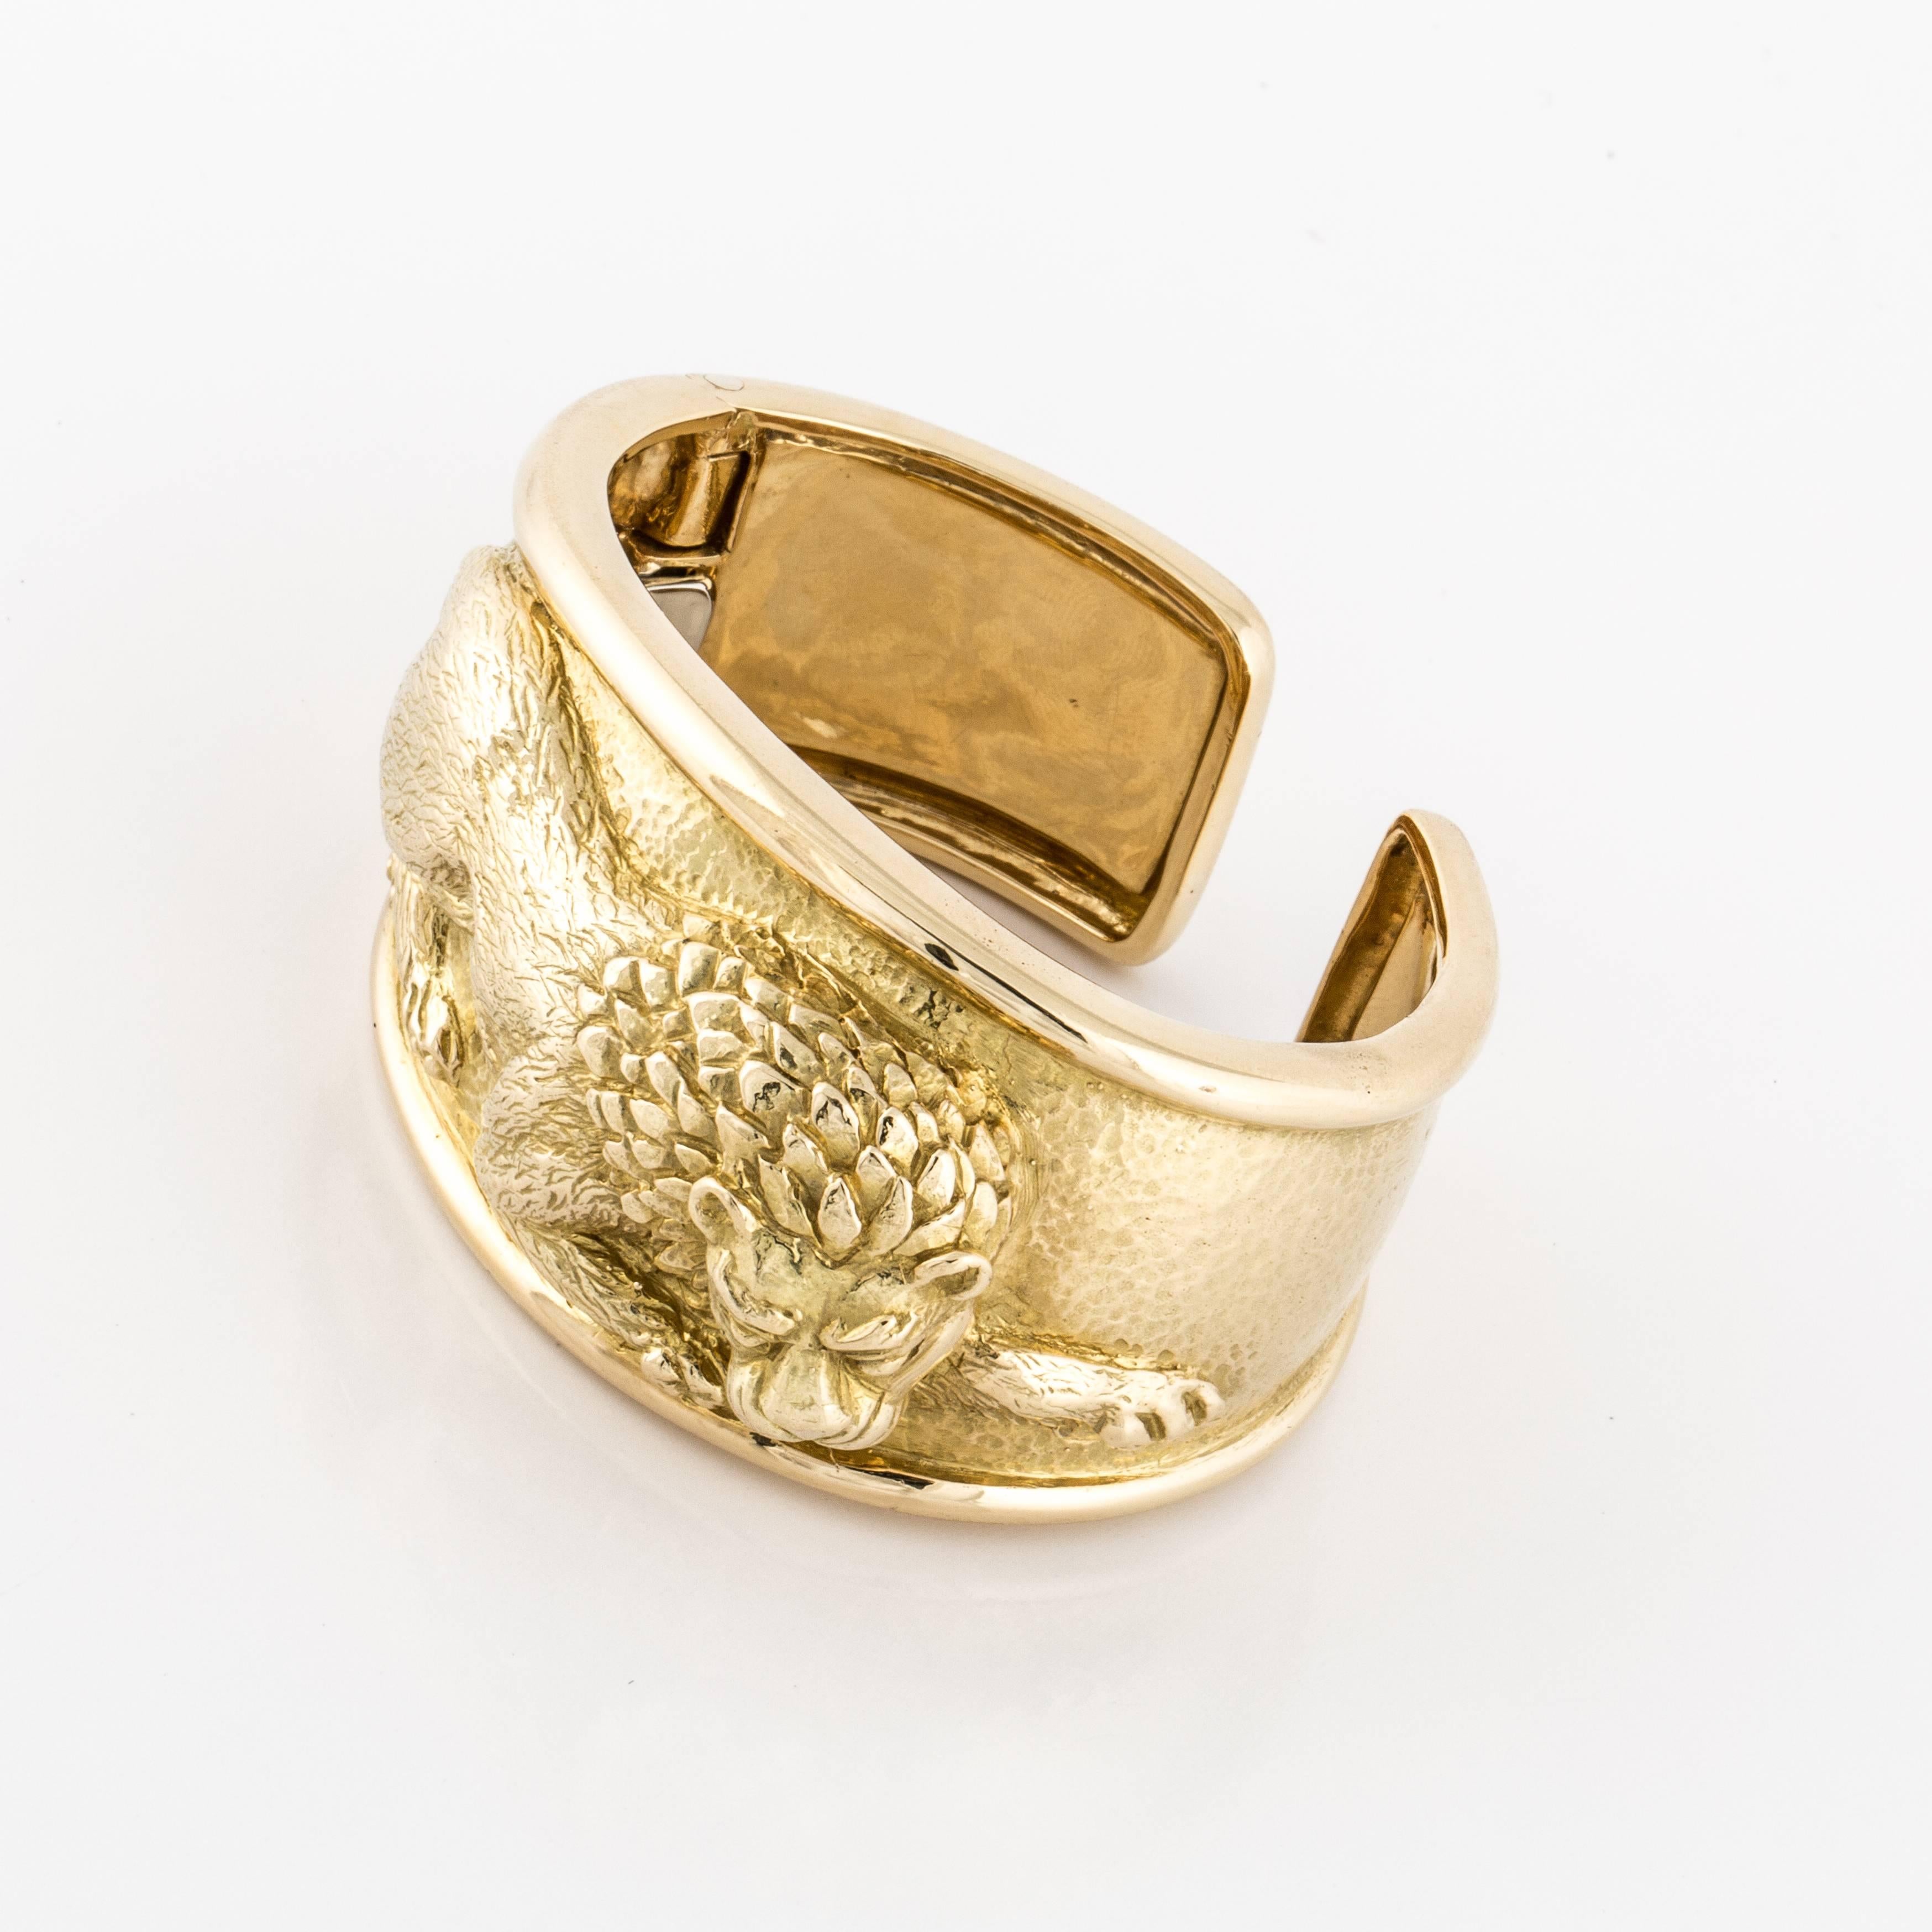 Classic David Webb bracelet depicting a lion.  The cuff is hinged at the side and the oval opening is 2-1/4".  Top of bracelet measures 1.5" and it tapers to 1.0" at the back.  Stands 3/4" tall.  Marked on the inside "Webb